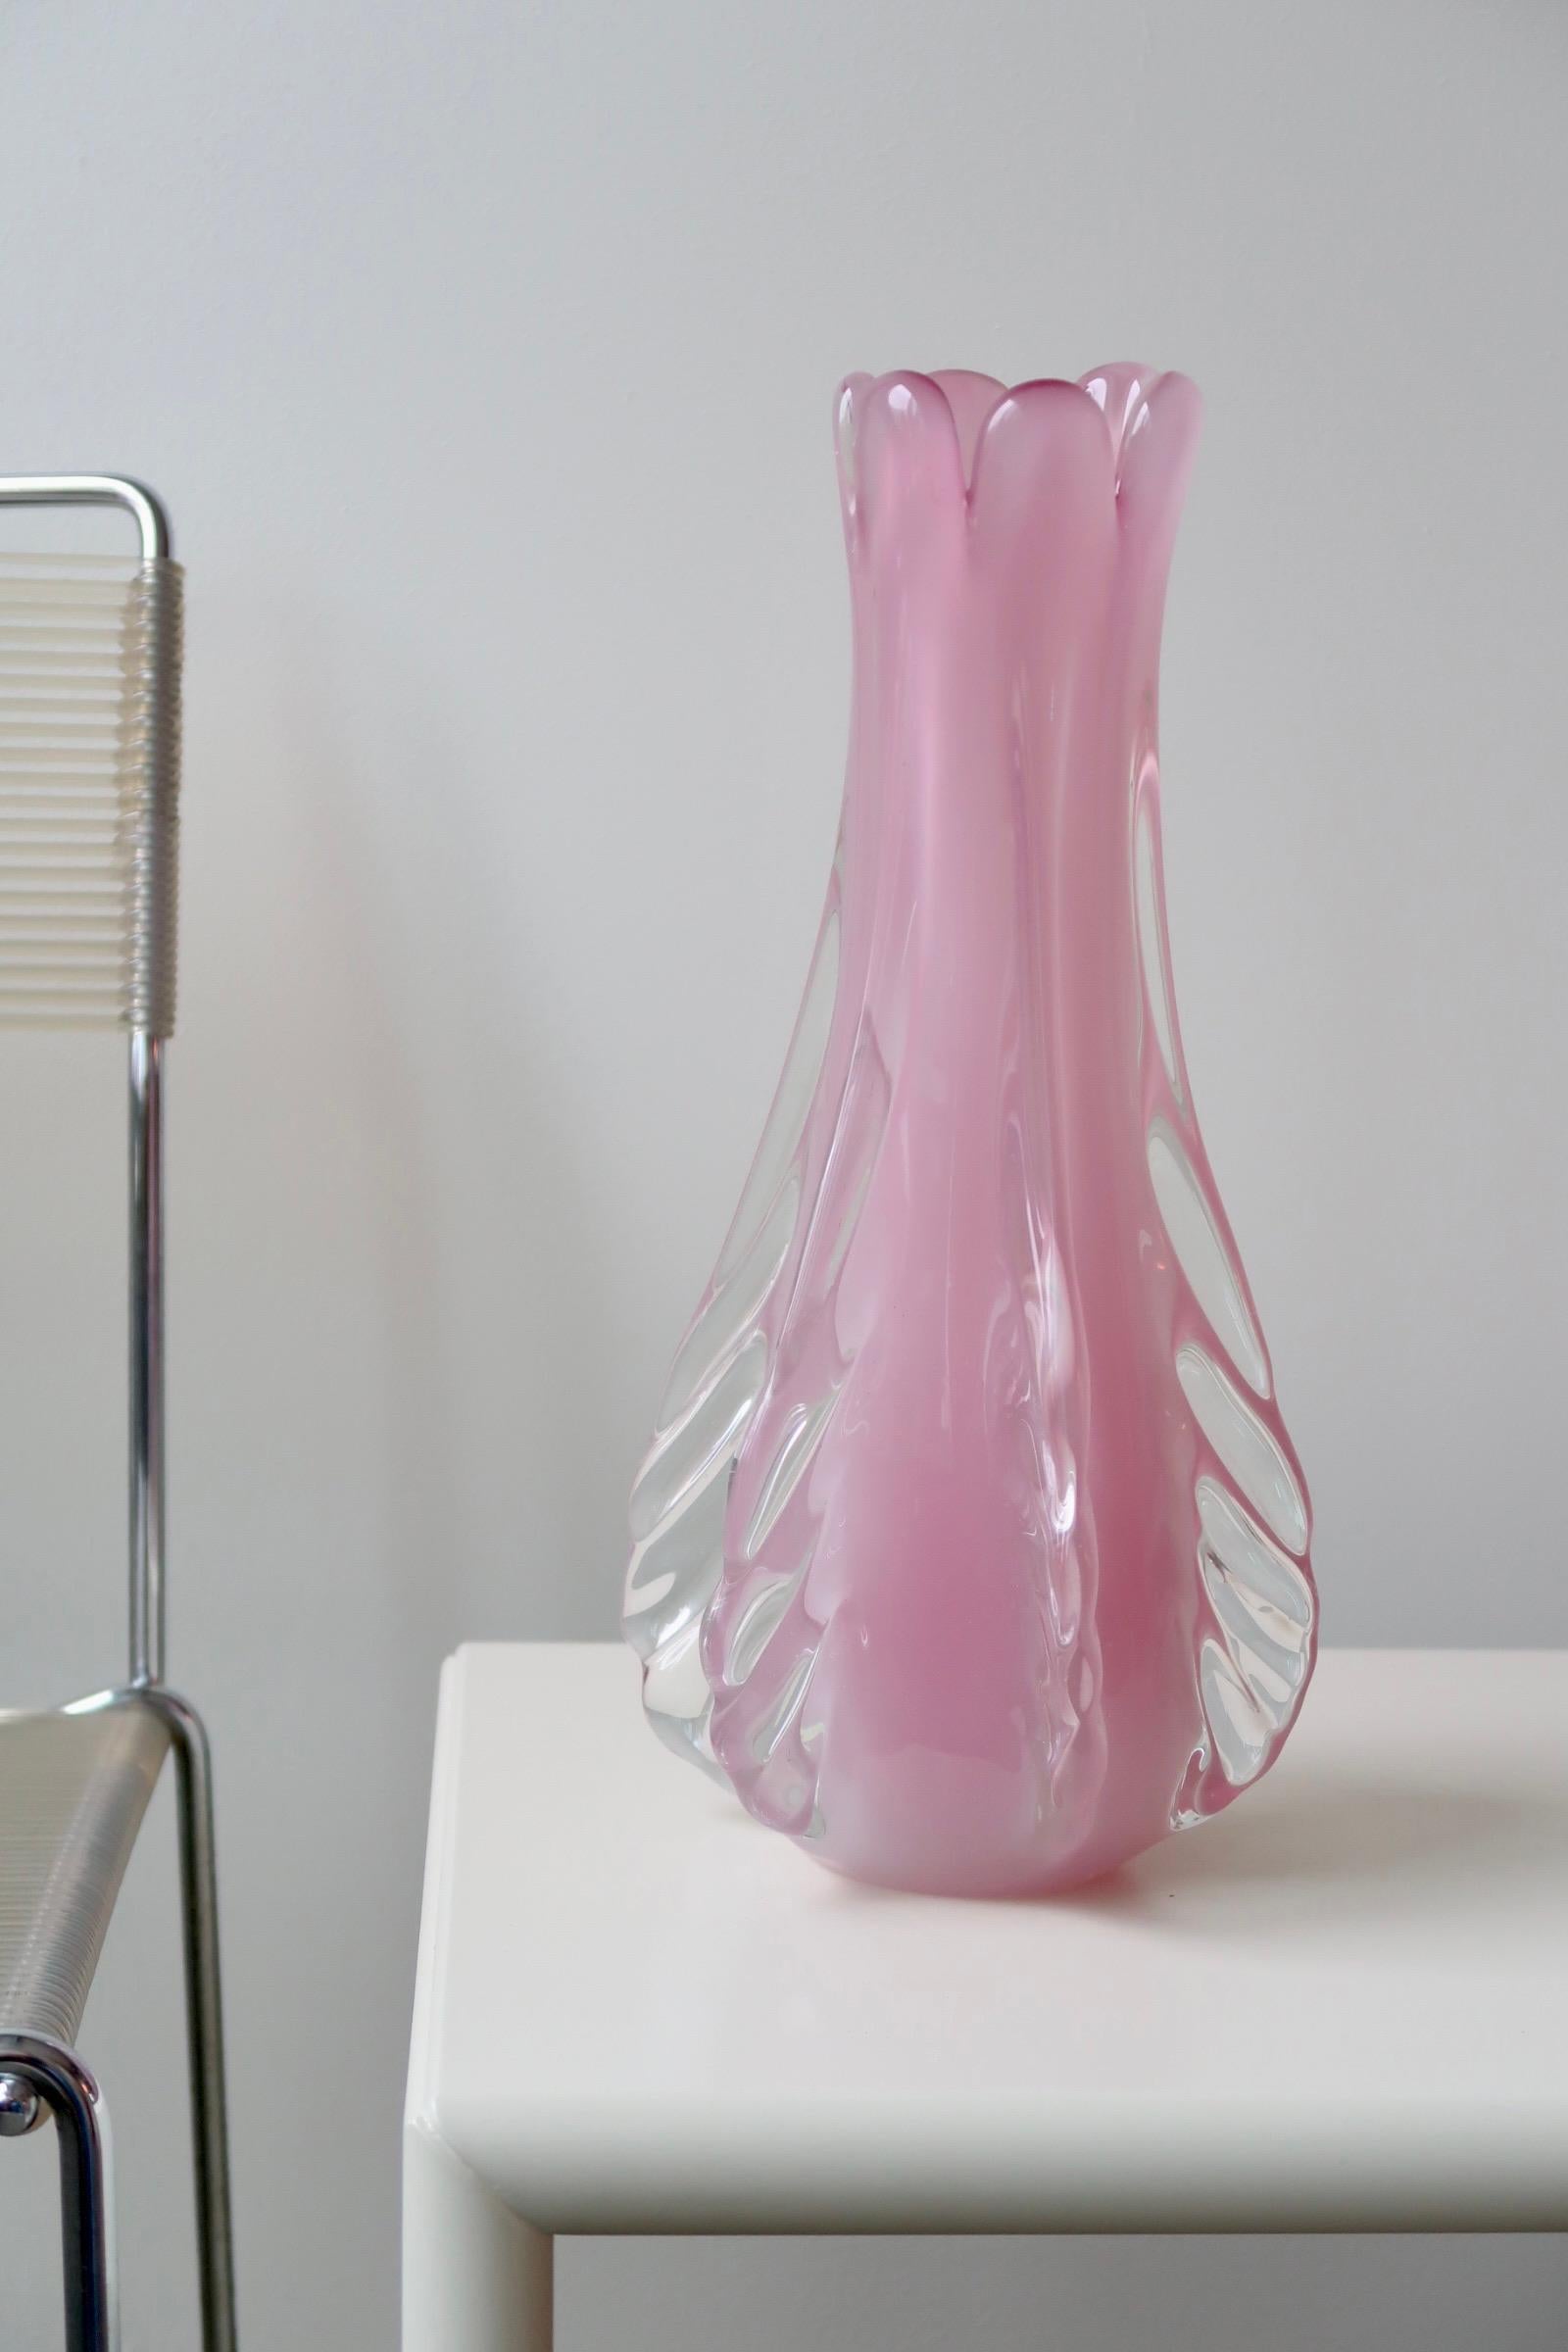 Mid-20th Century Large Vintage Murano Pink Ribbed Alabastro Opal Vase Mouth Blown Italian, 1960s